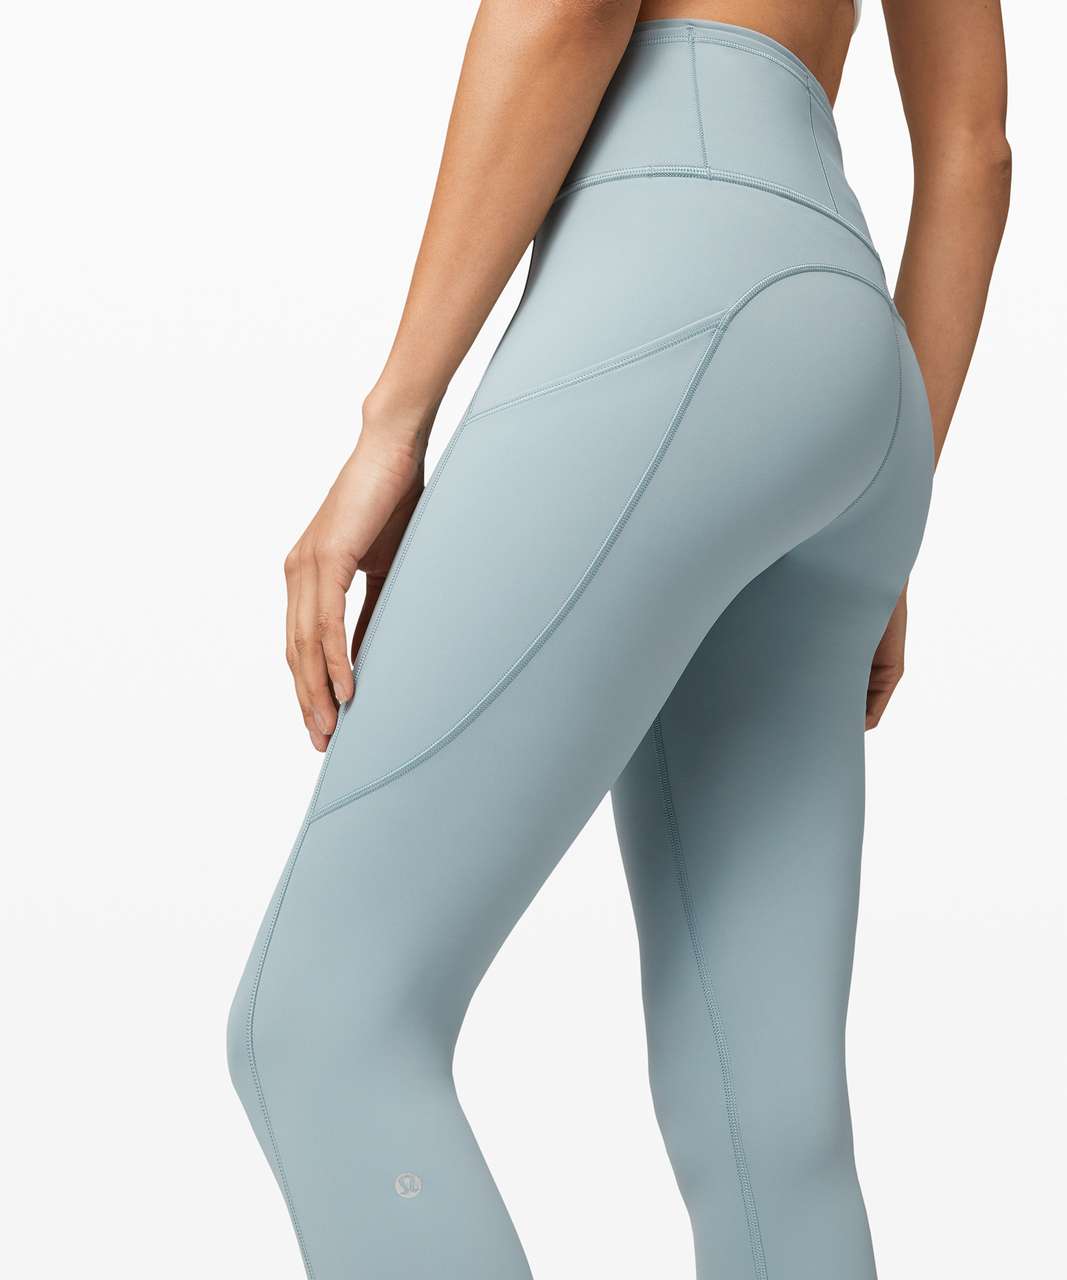 Lululemon Fast and Free Tight 28" *Non-Reflective - Blue Cast